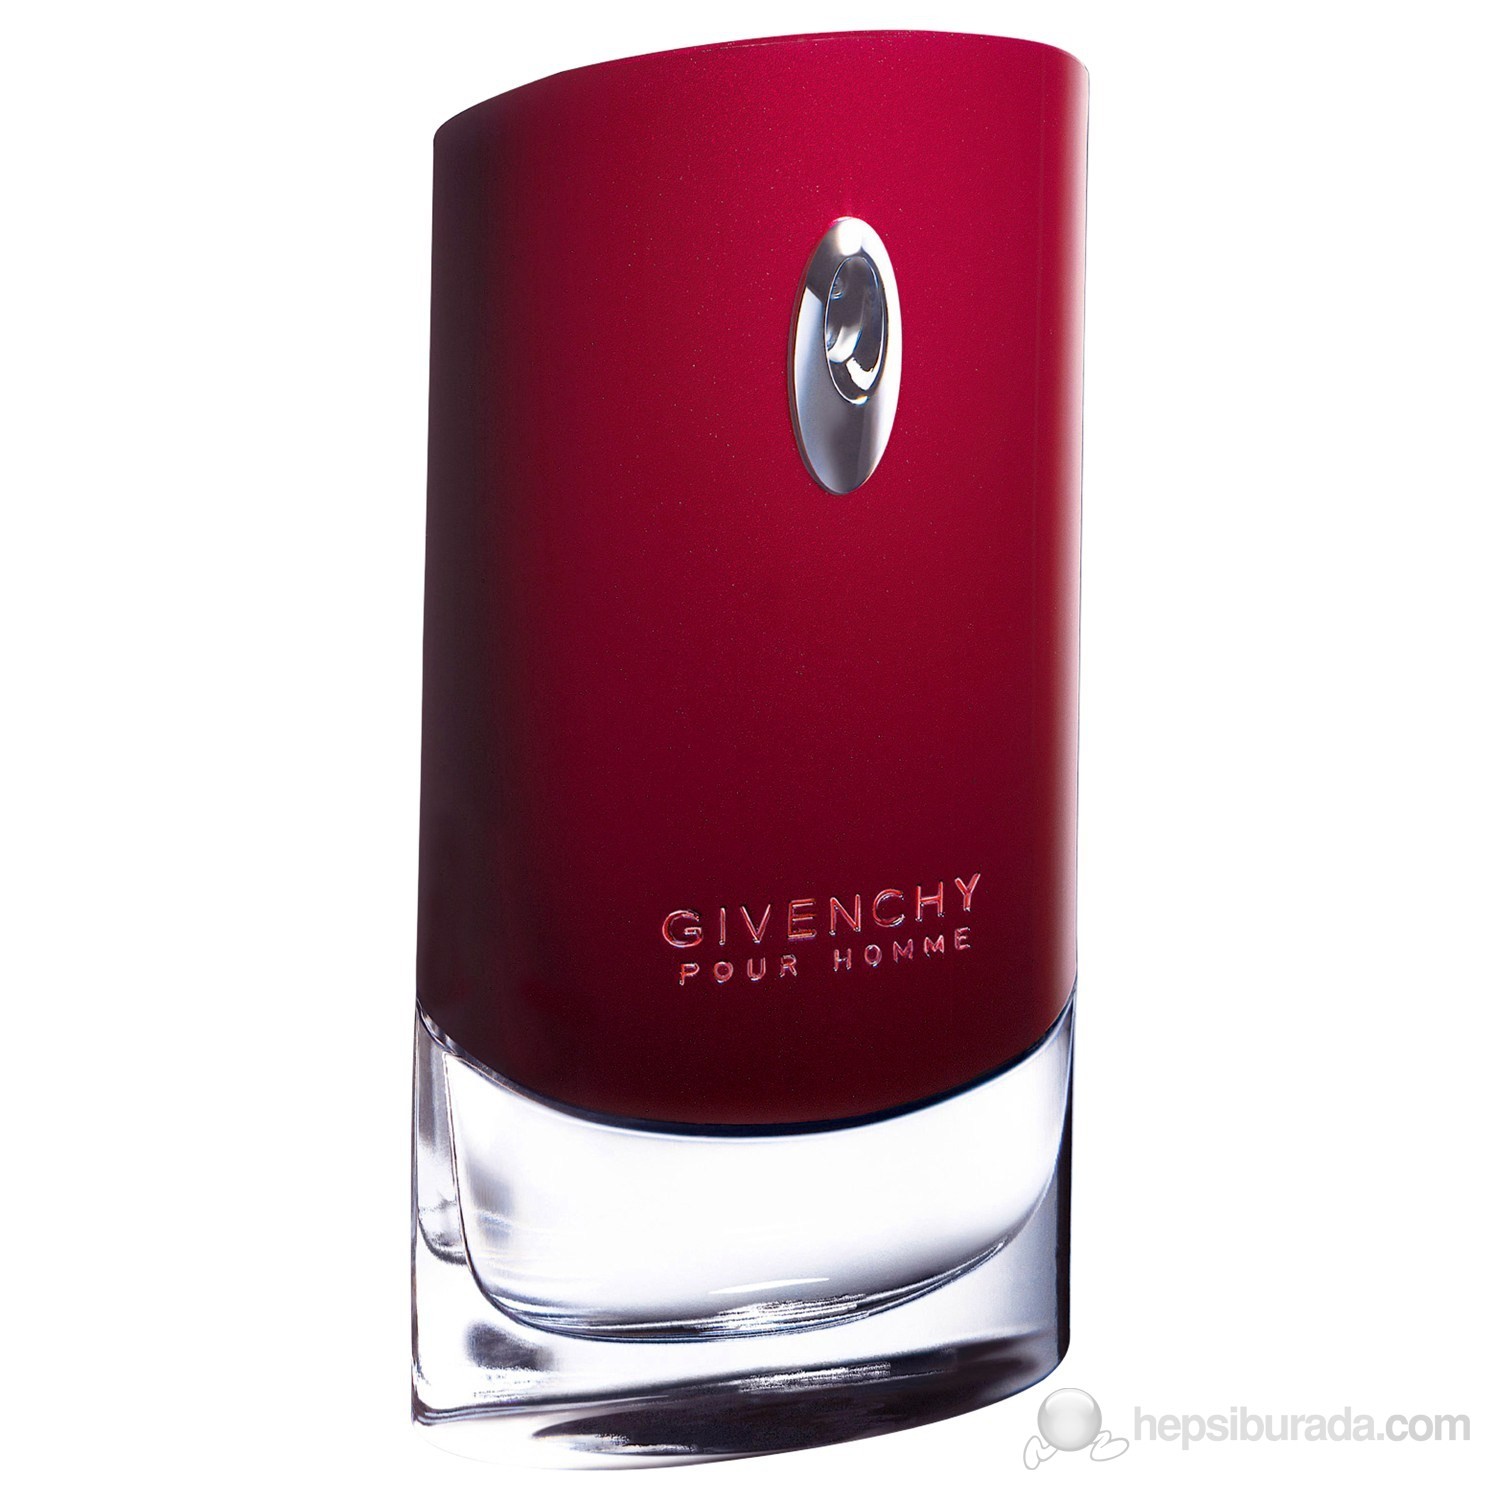 Givenchy pour homme оригинал. Givenchy "pour homme" EDT, 100ml. Givenchy pour homme Givenchy. Givenchy Givenchy pour homme, 100 ml. Givenchy pour homme Red.